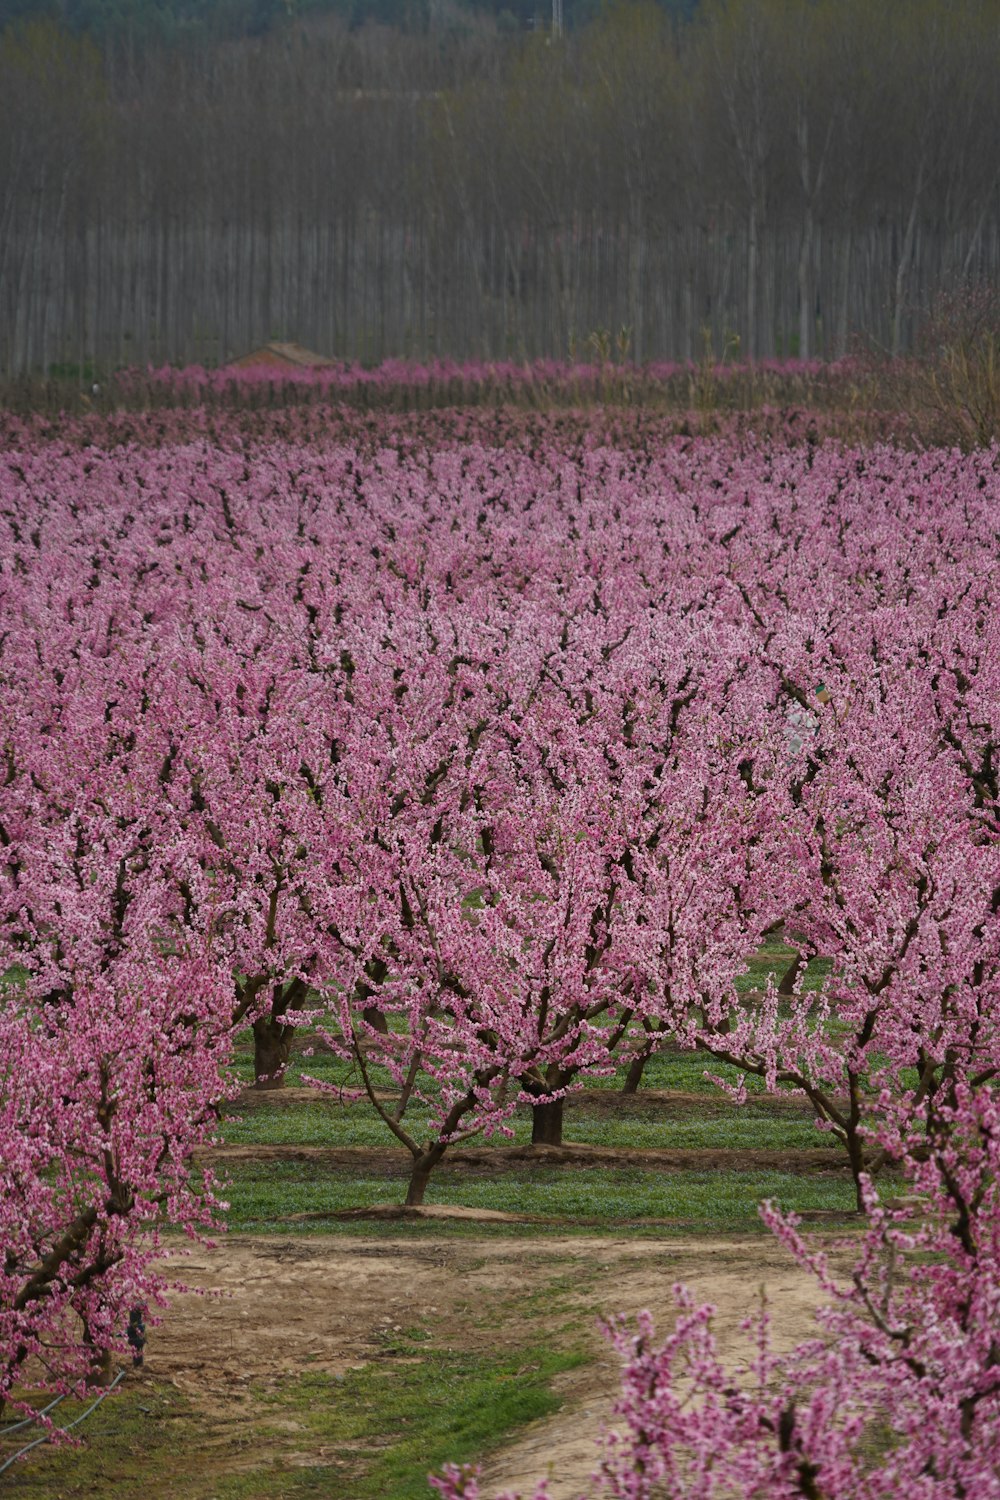 a field full of pink flowers with trees in the background